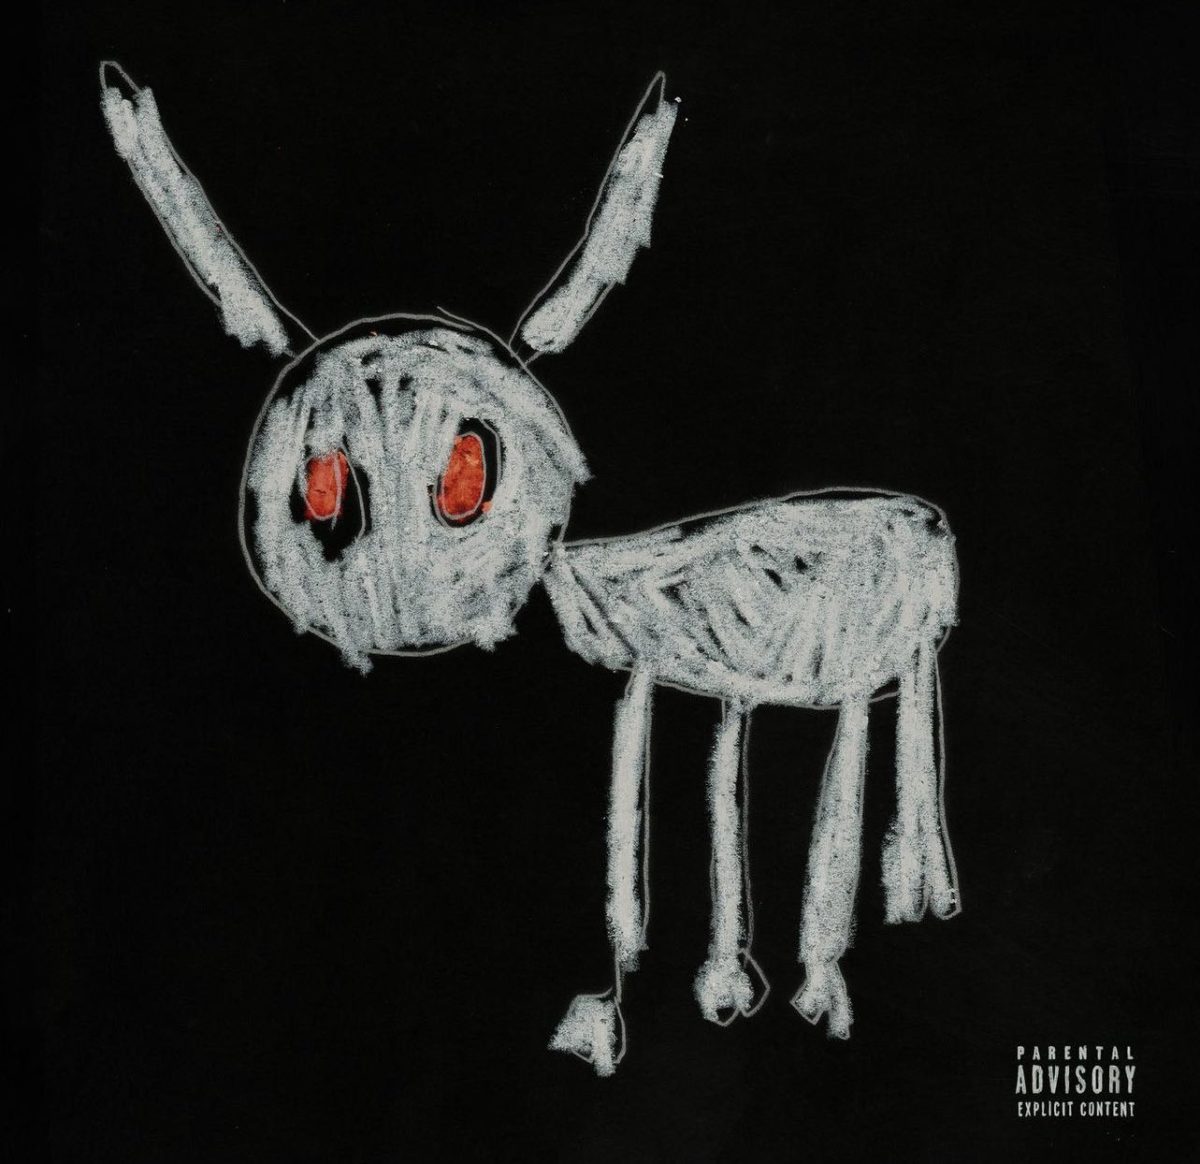 The album Cover for Drakes upcoming LP For All The Dogs. The cover was drawn by his son, Adonis Graham.